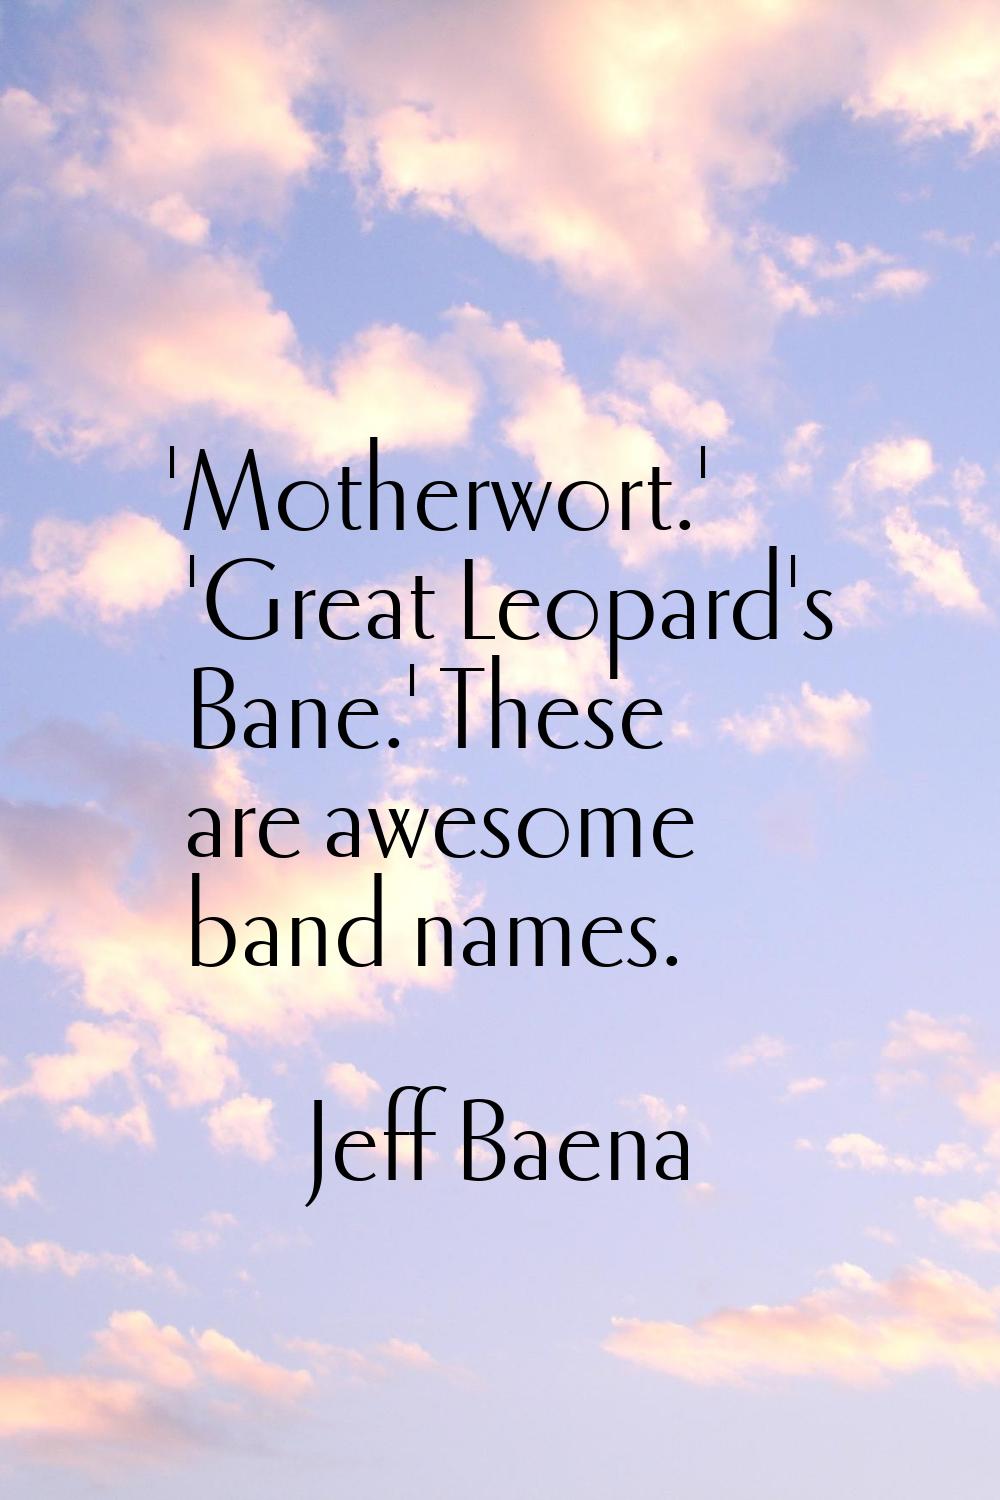 'Motherwort.' 'Great Leopard's Bane.' These are awesome band names.